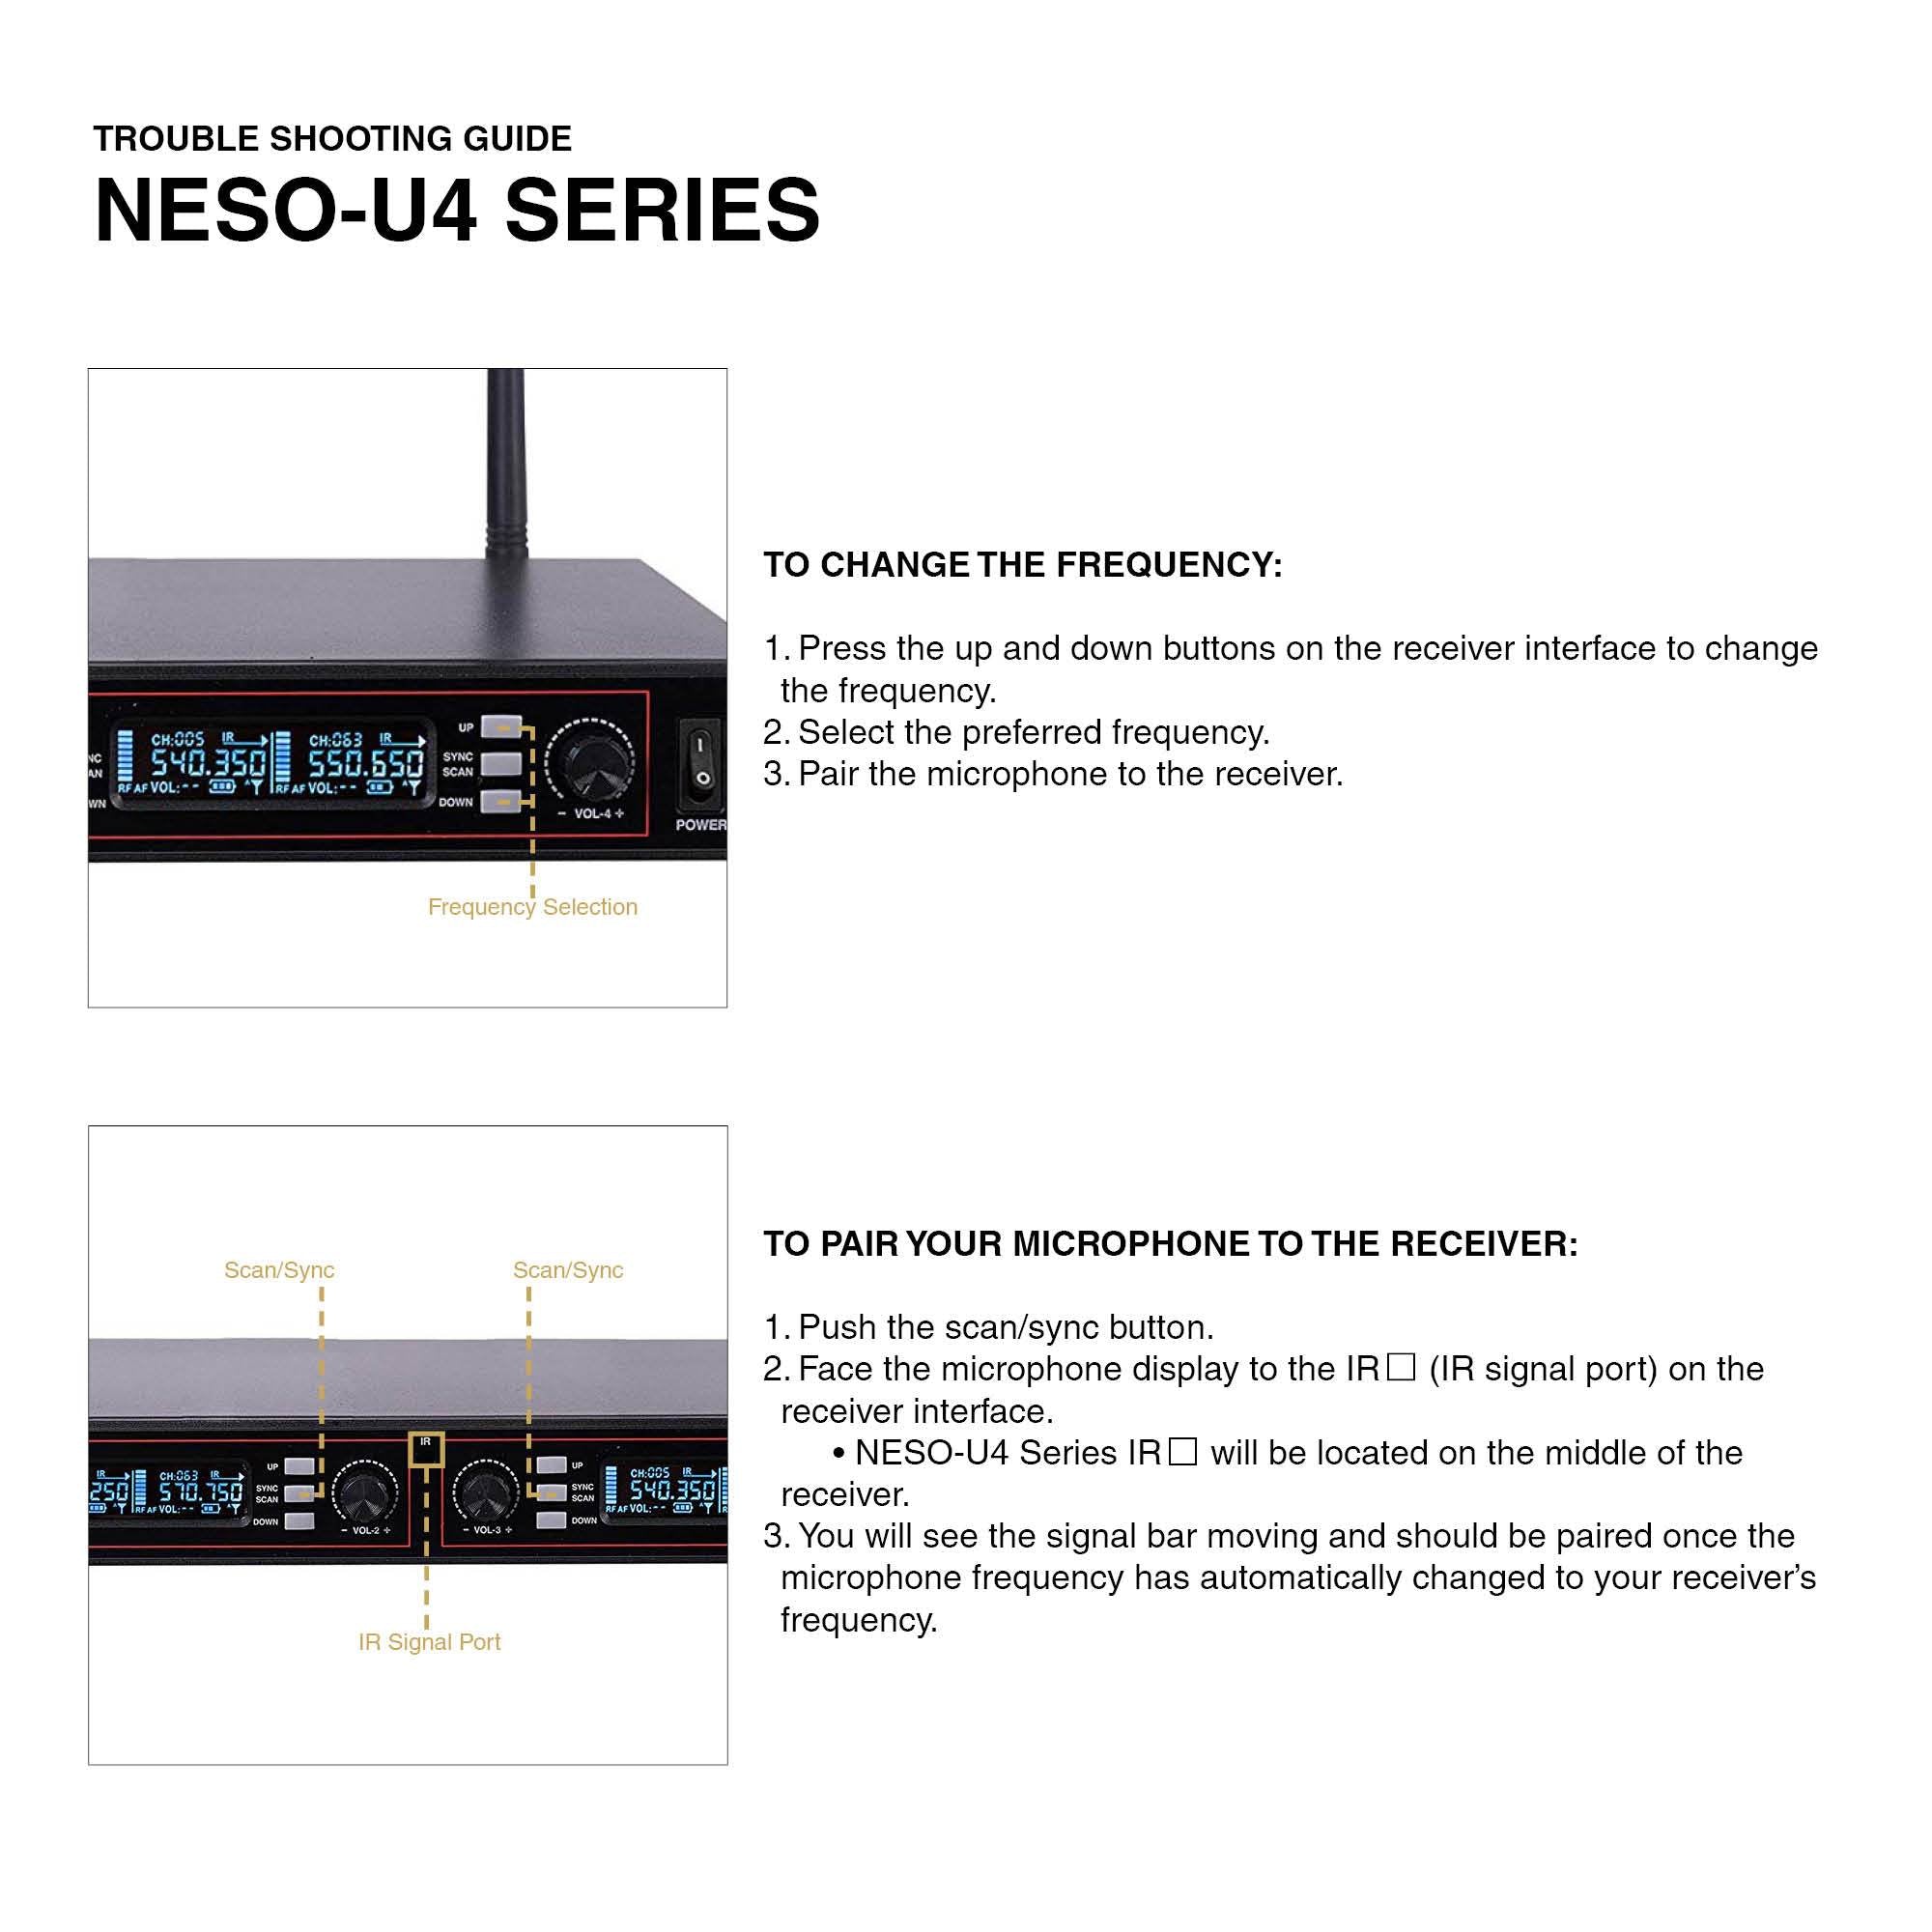 NESO-U4 SERIES NESO-U4HH NESO-U4HL NESO-U4LL Troubleshooting Guide How to Connect Sync Microphone to Receiver How to Change the Frequency